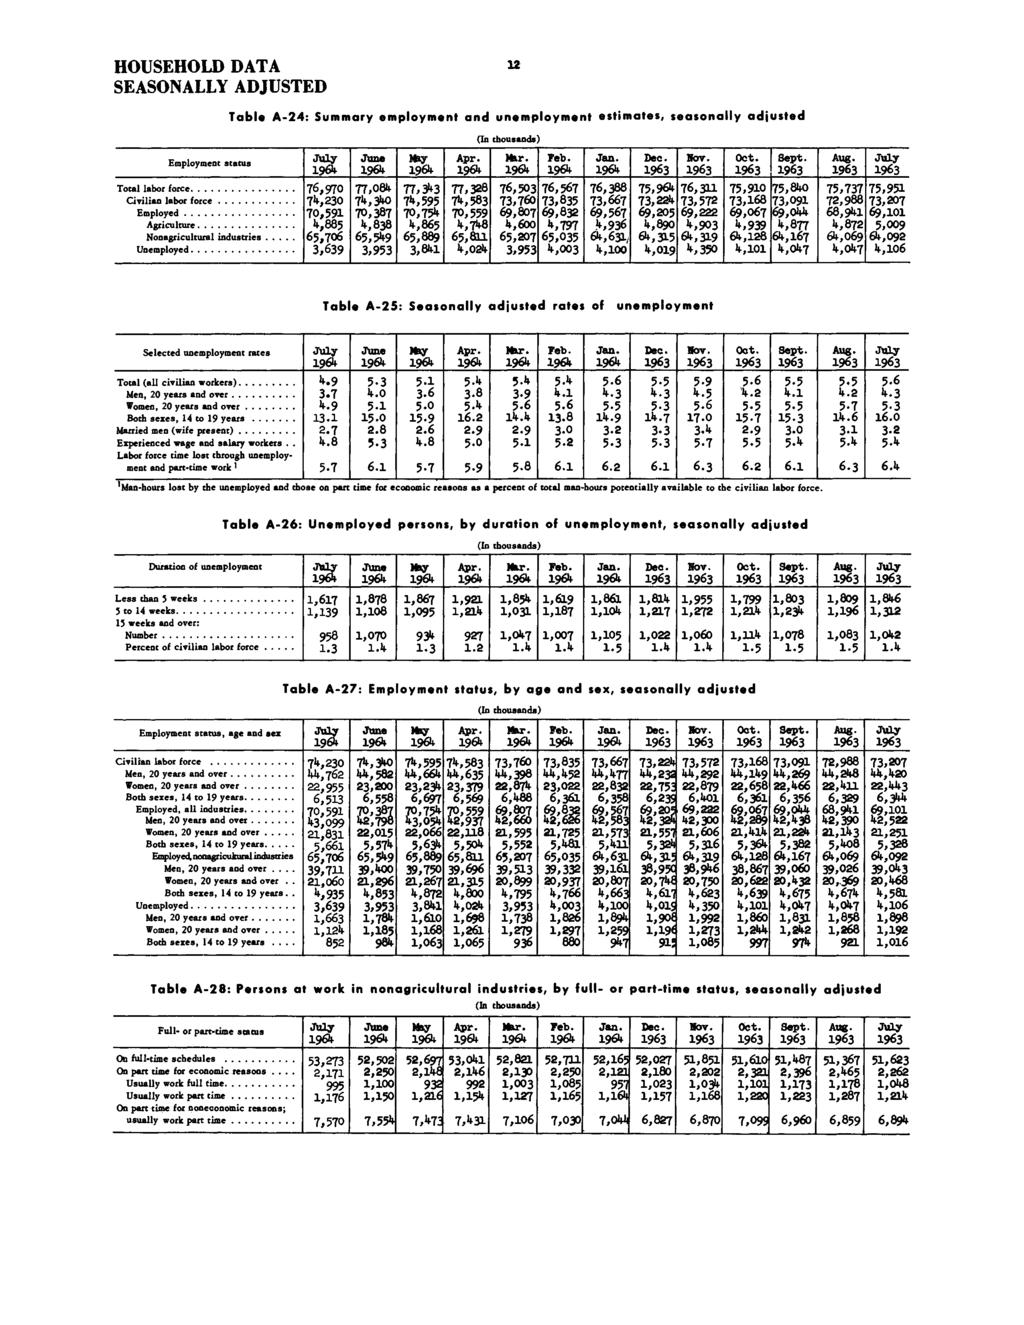 HOUSEHOLD DATA SEASONALLY ADJUSTED 12 Table A-24: Summary employment and unemployment estimates, seasonally adjusted Employment status labor force Civilian labor force Employed Agriculture